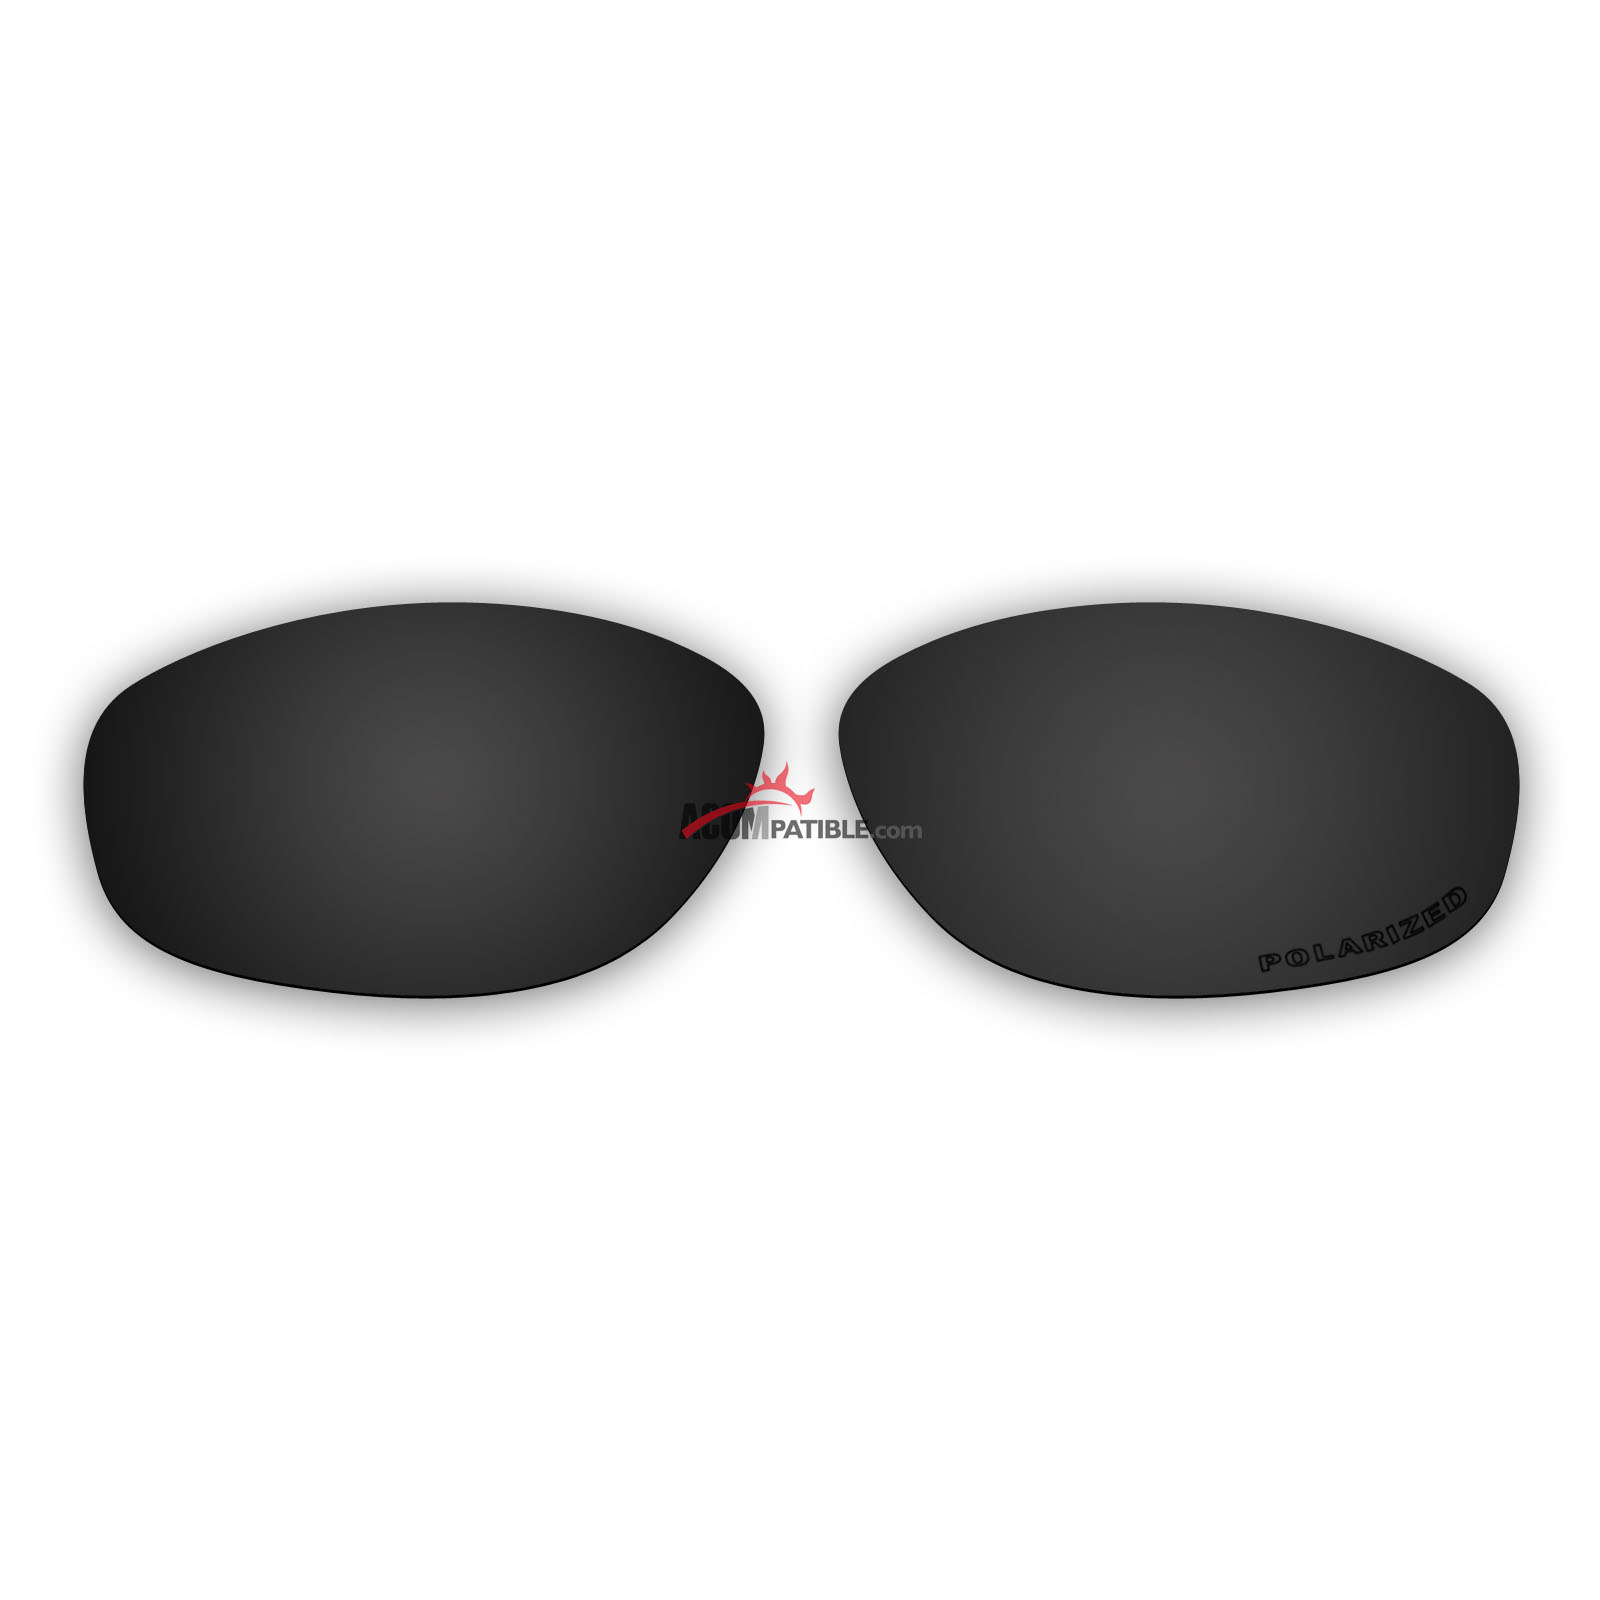 Replacement Polarized Lenses for Oakley Hatchet Wire (Black) - Acompatible